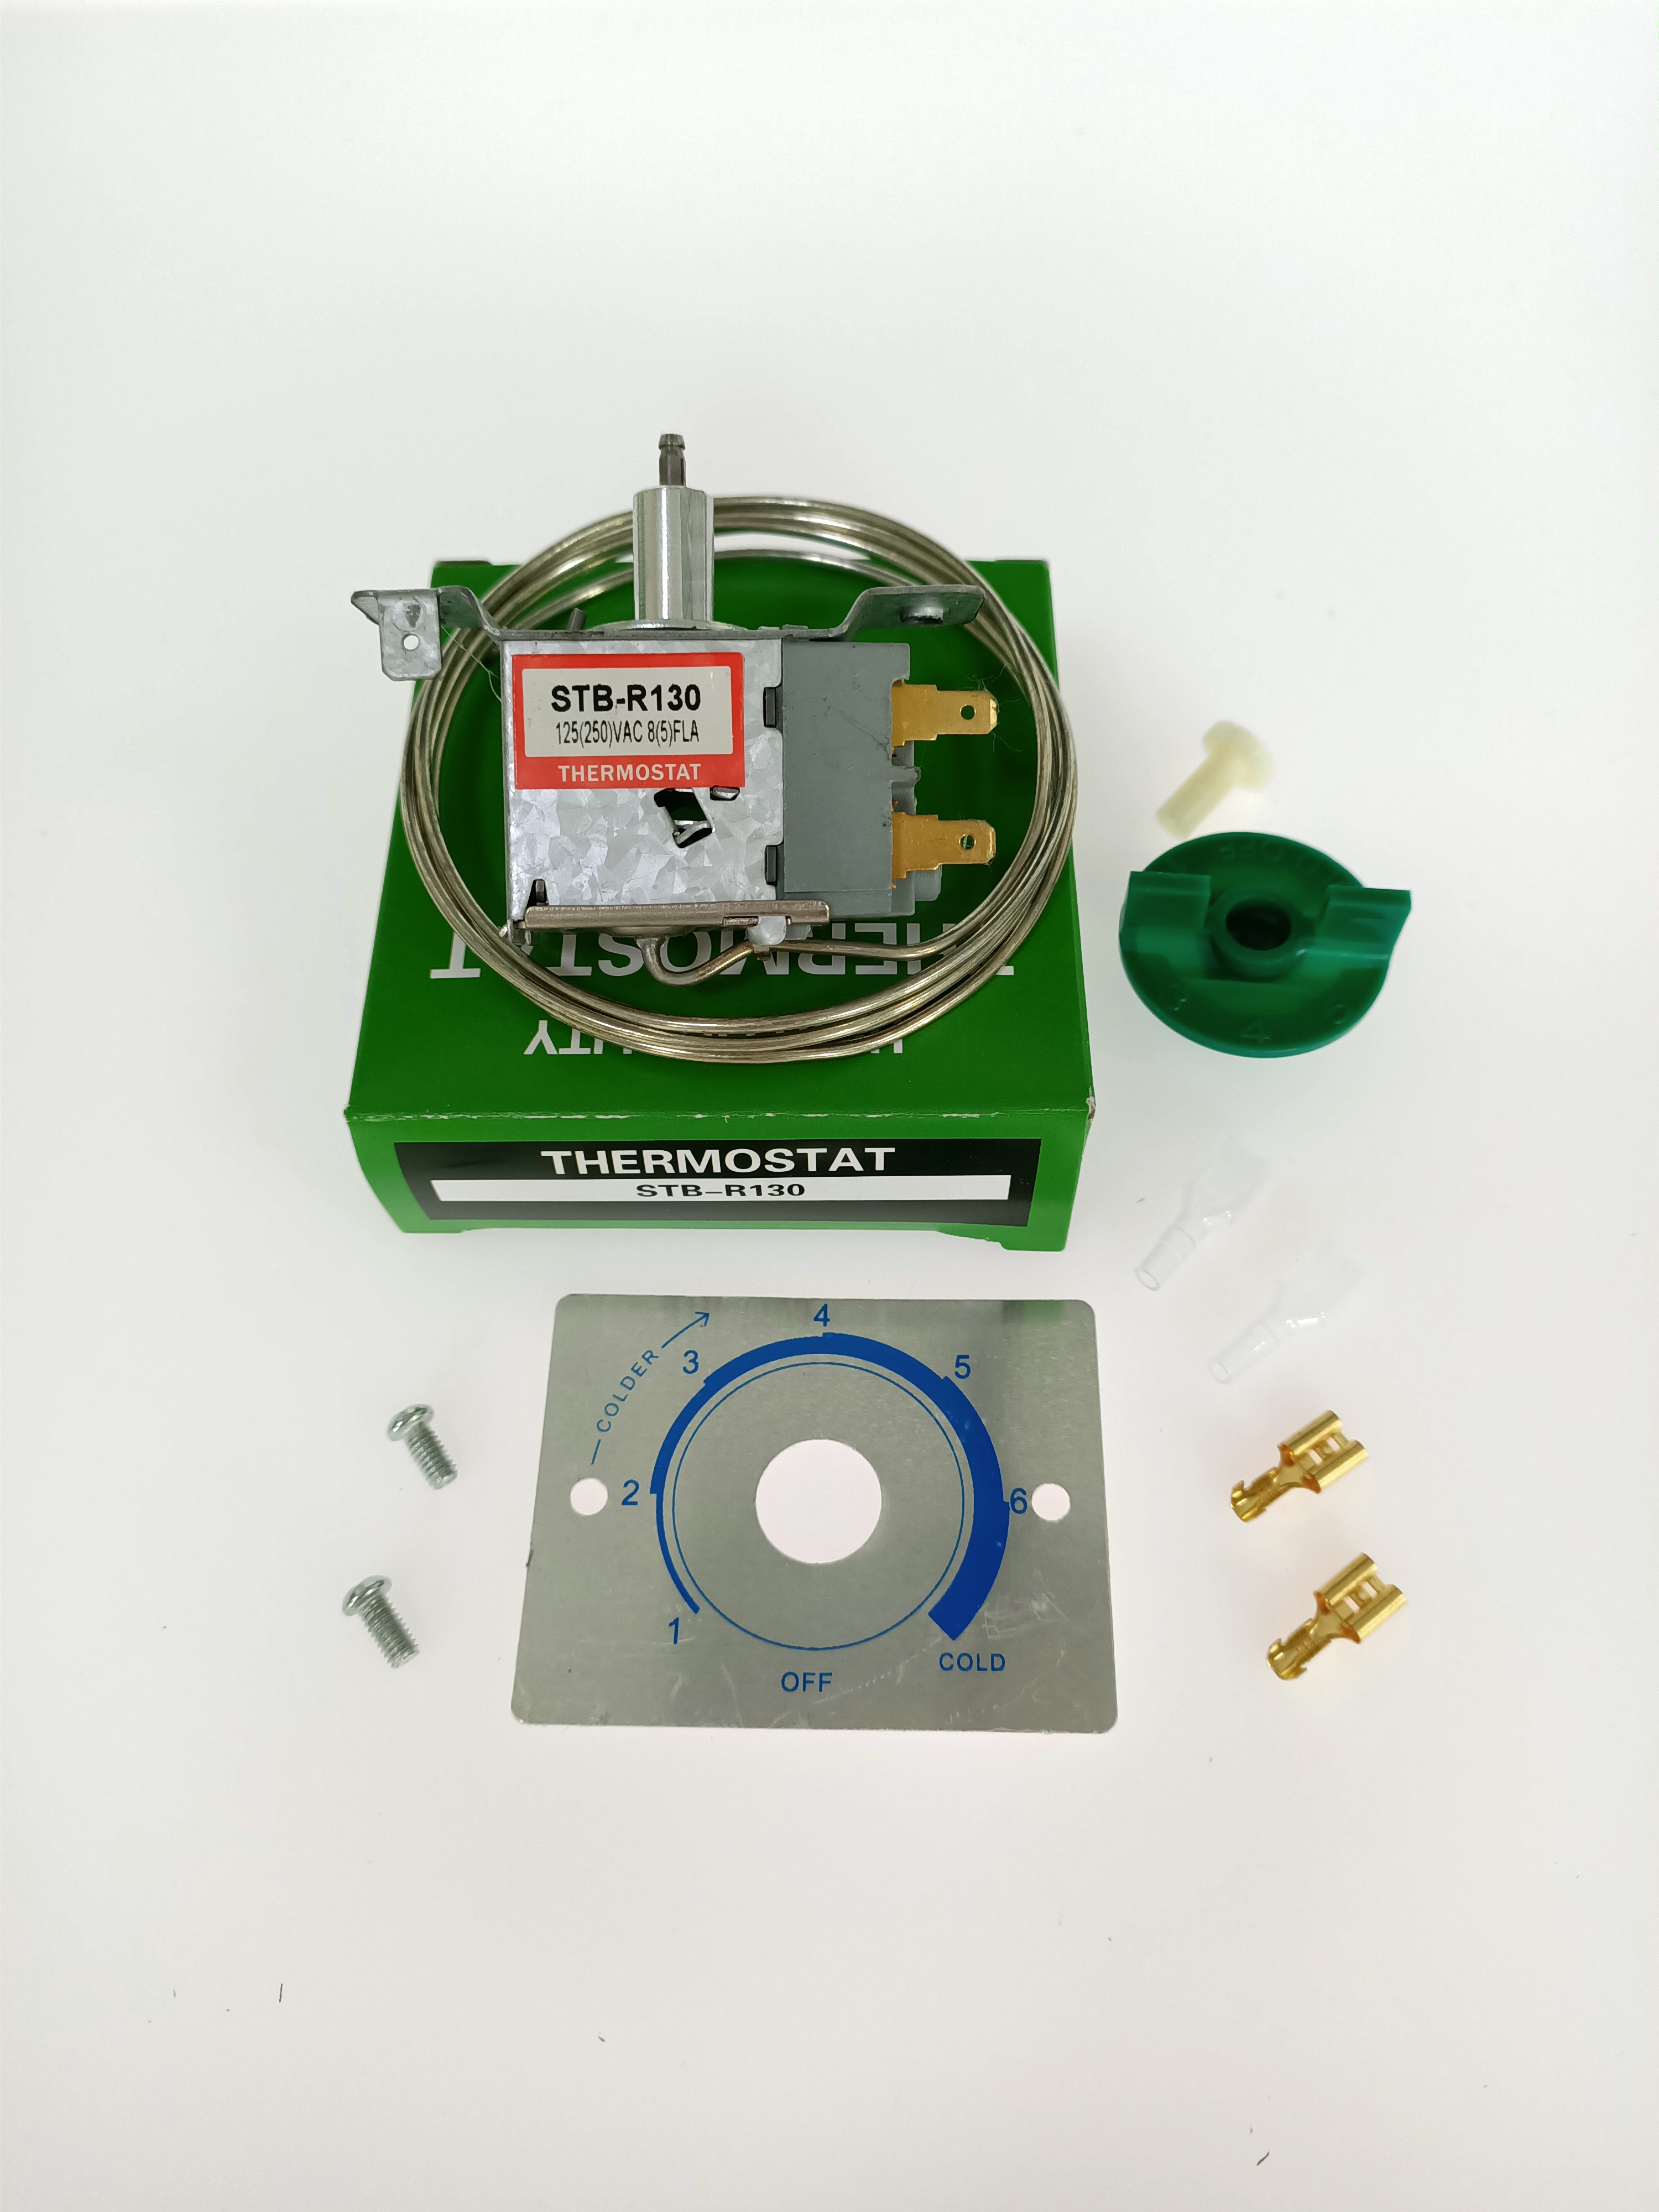 SWTB-R130 defrost thermostat for refrigerator freezer